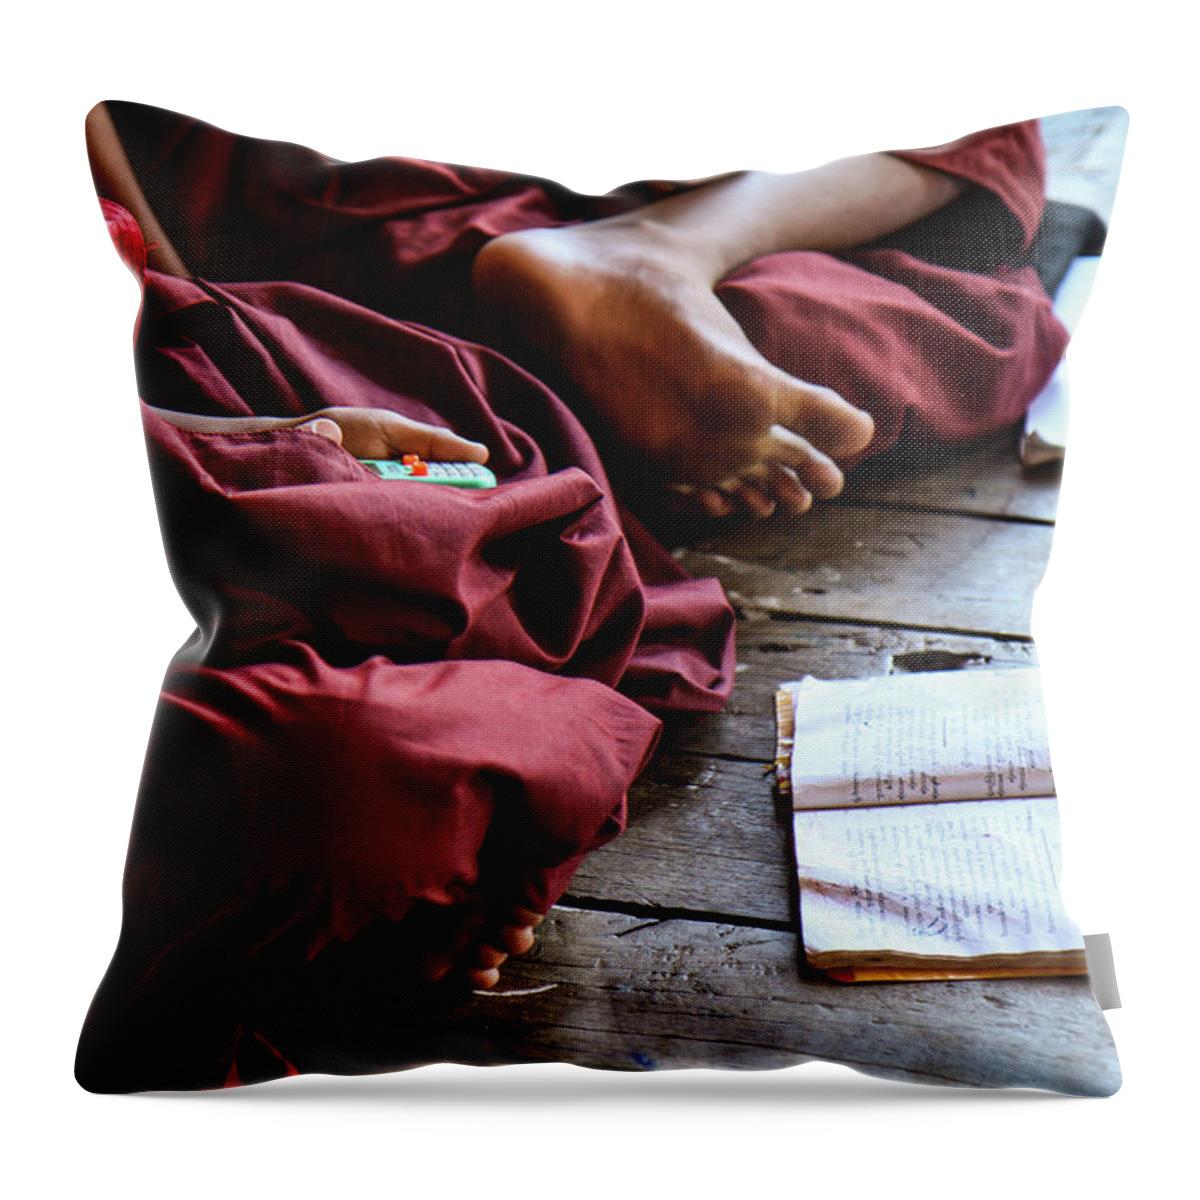 Hiding Throw Pillow featuring the photograph Young Monk Playing With A Toy by Gary Koh, Singapore